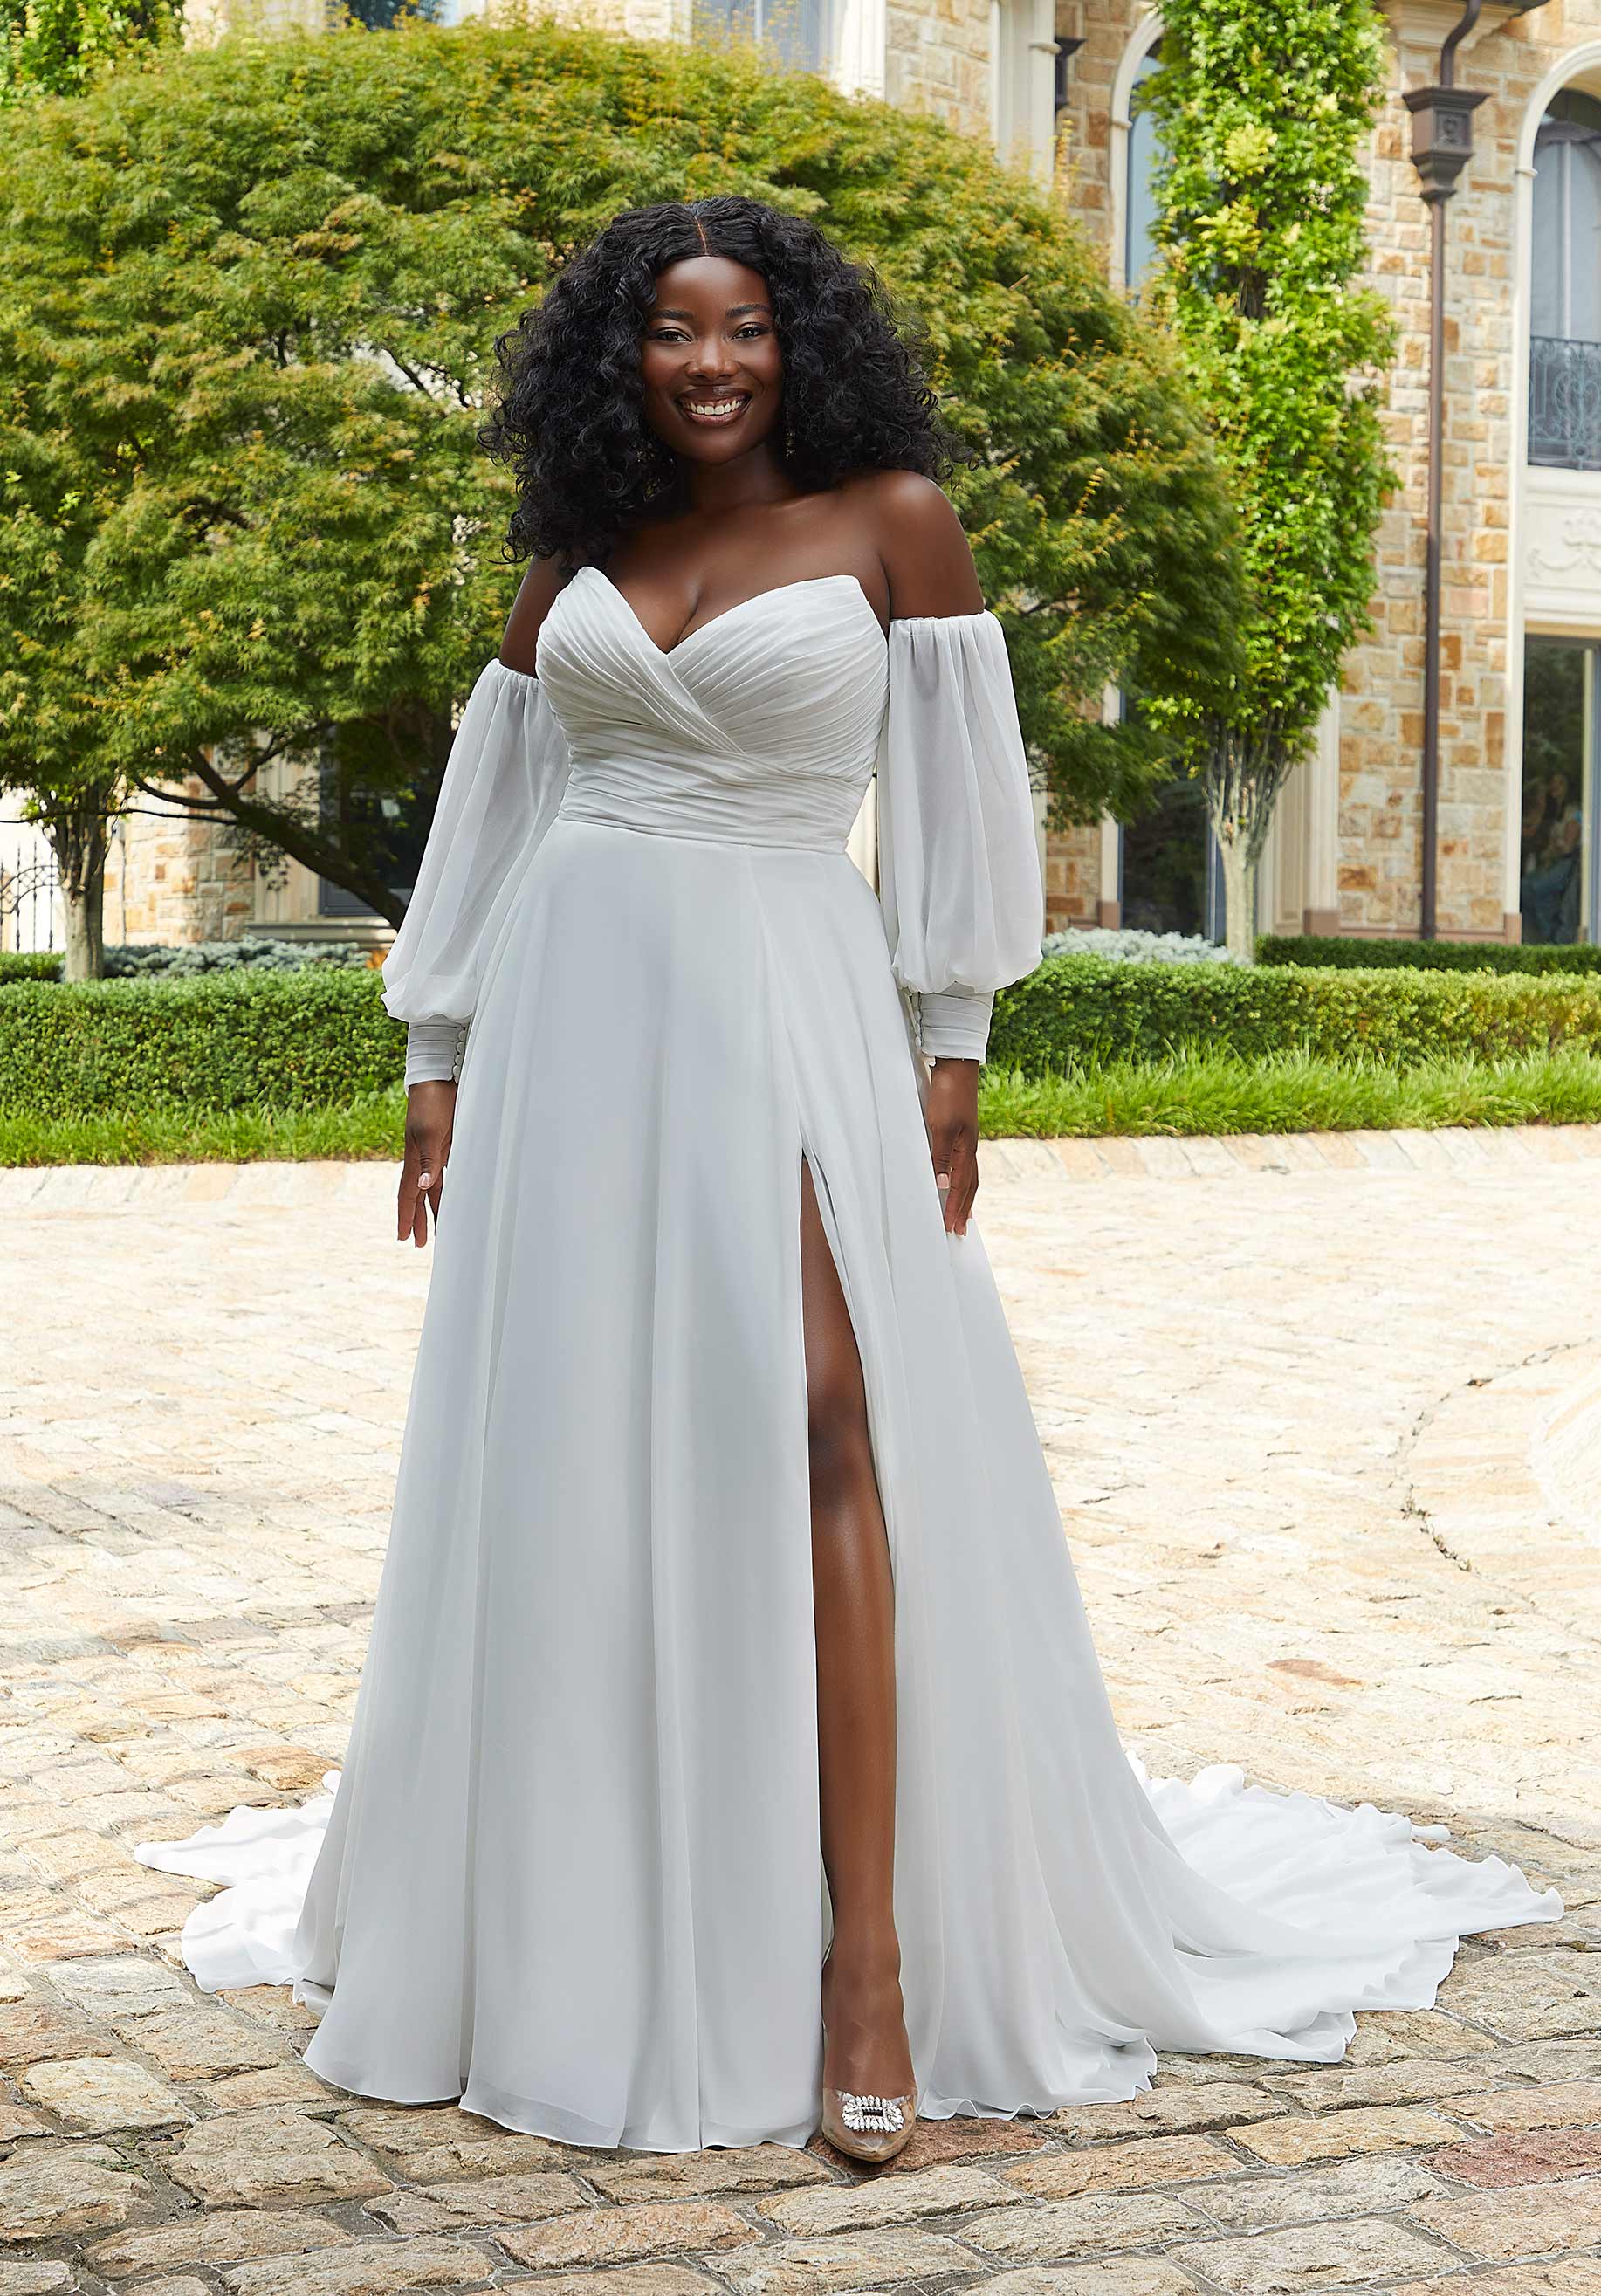 The Best Wedding Dresses for Brides with Apple-Shape Body Types